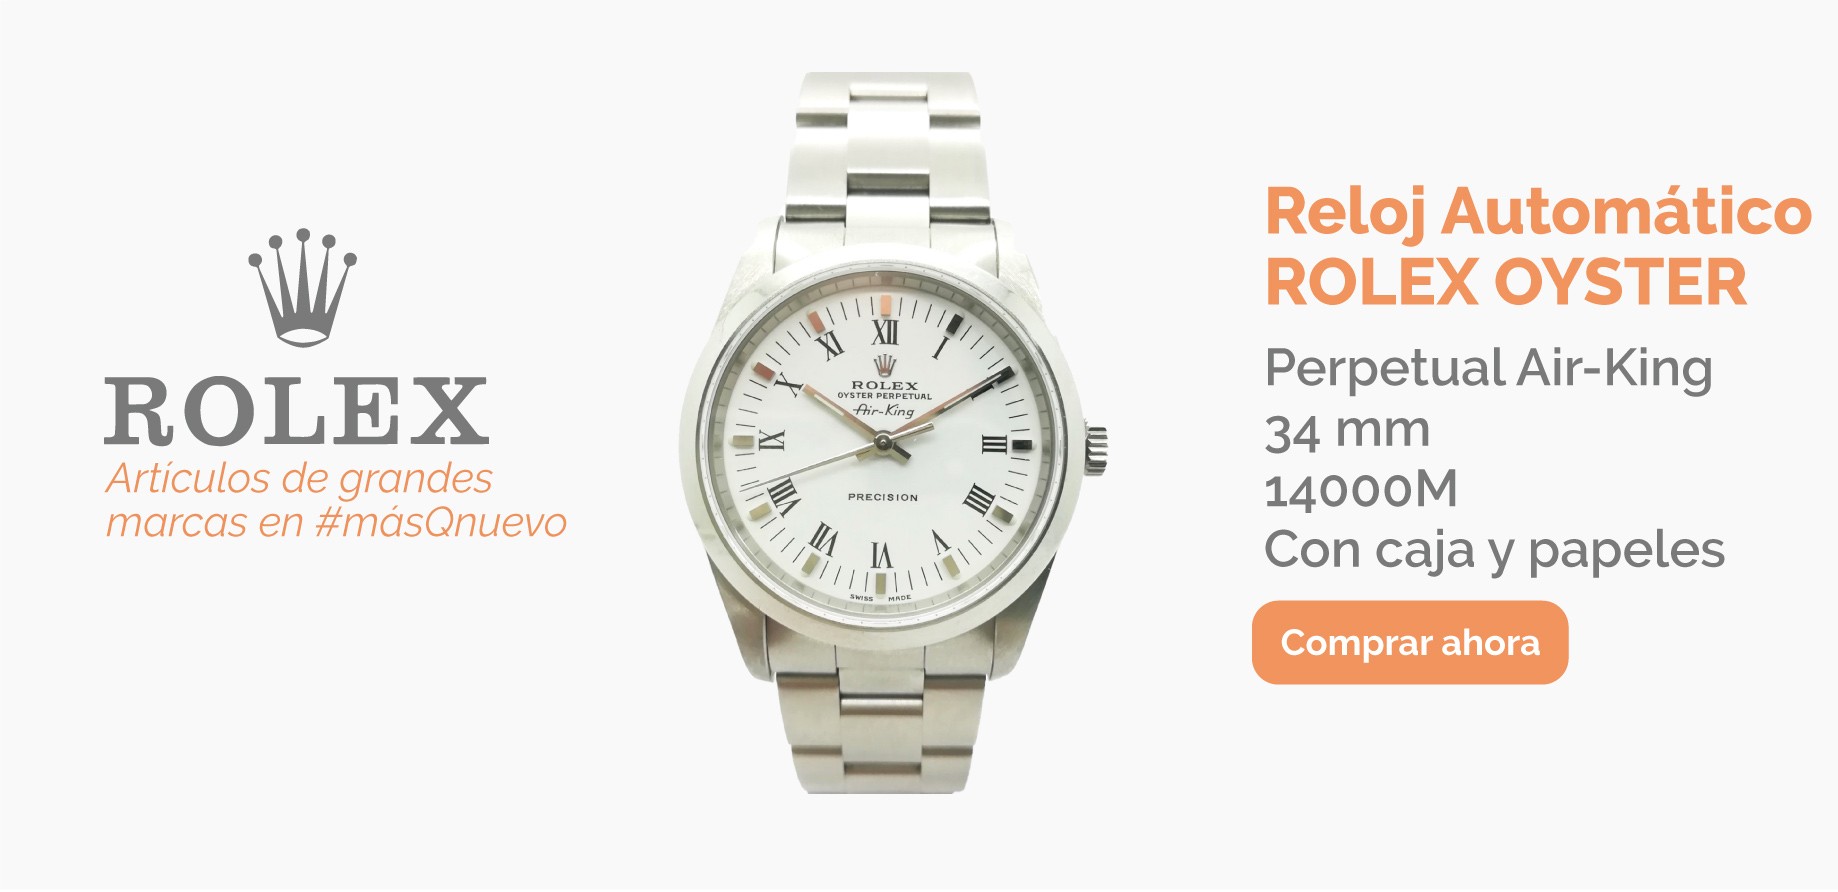 Relojes Rolex Oyster perpetual